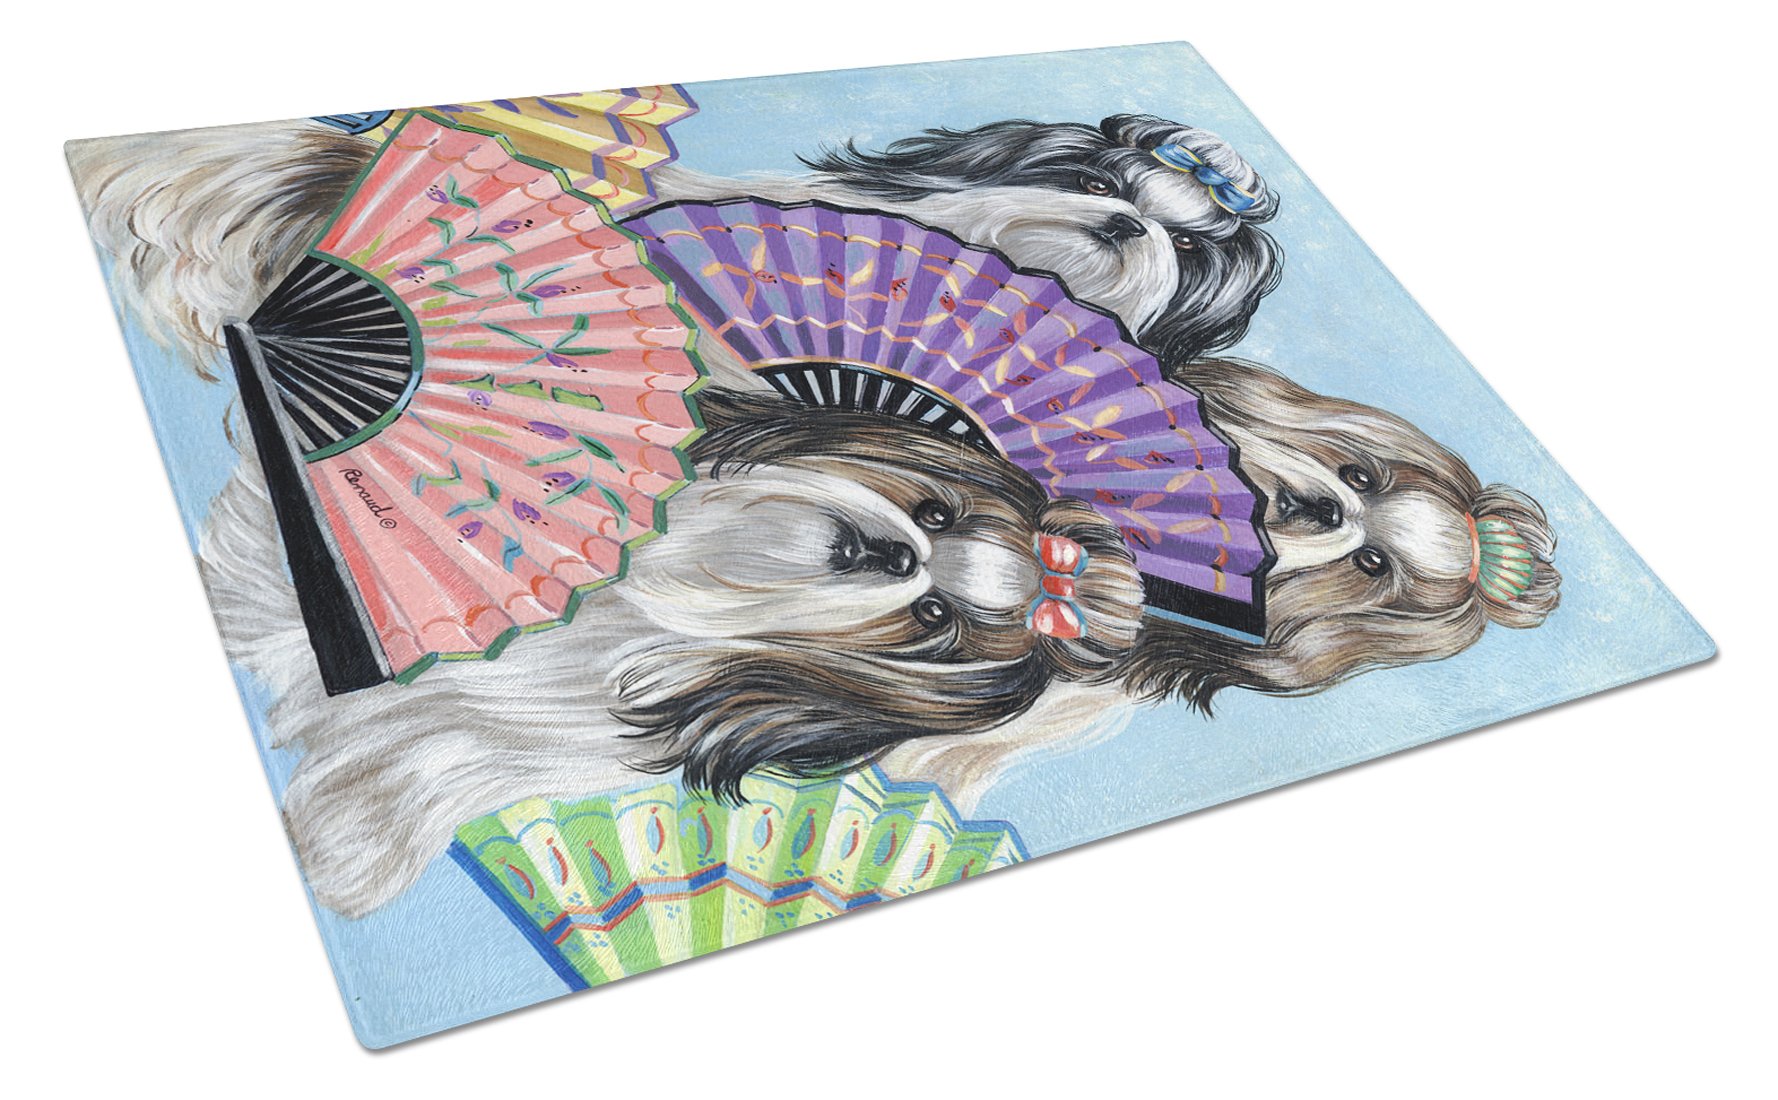 Shih Tzu Top Fans Glass Cutting Board Large PPP3190LCB by Caroline's Treasures